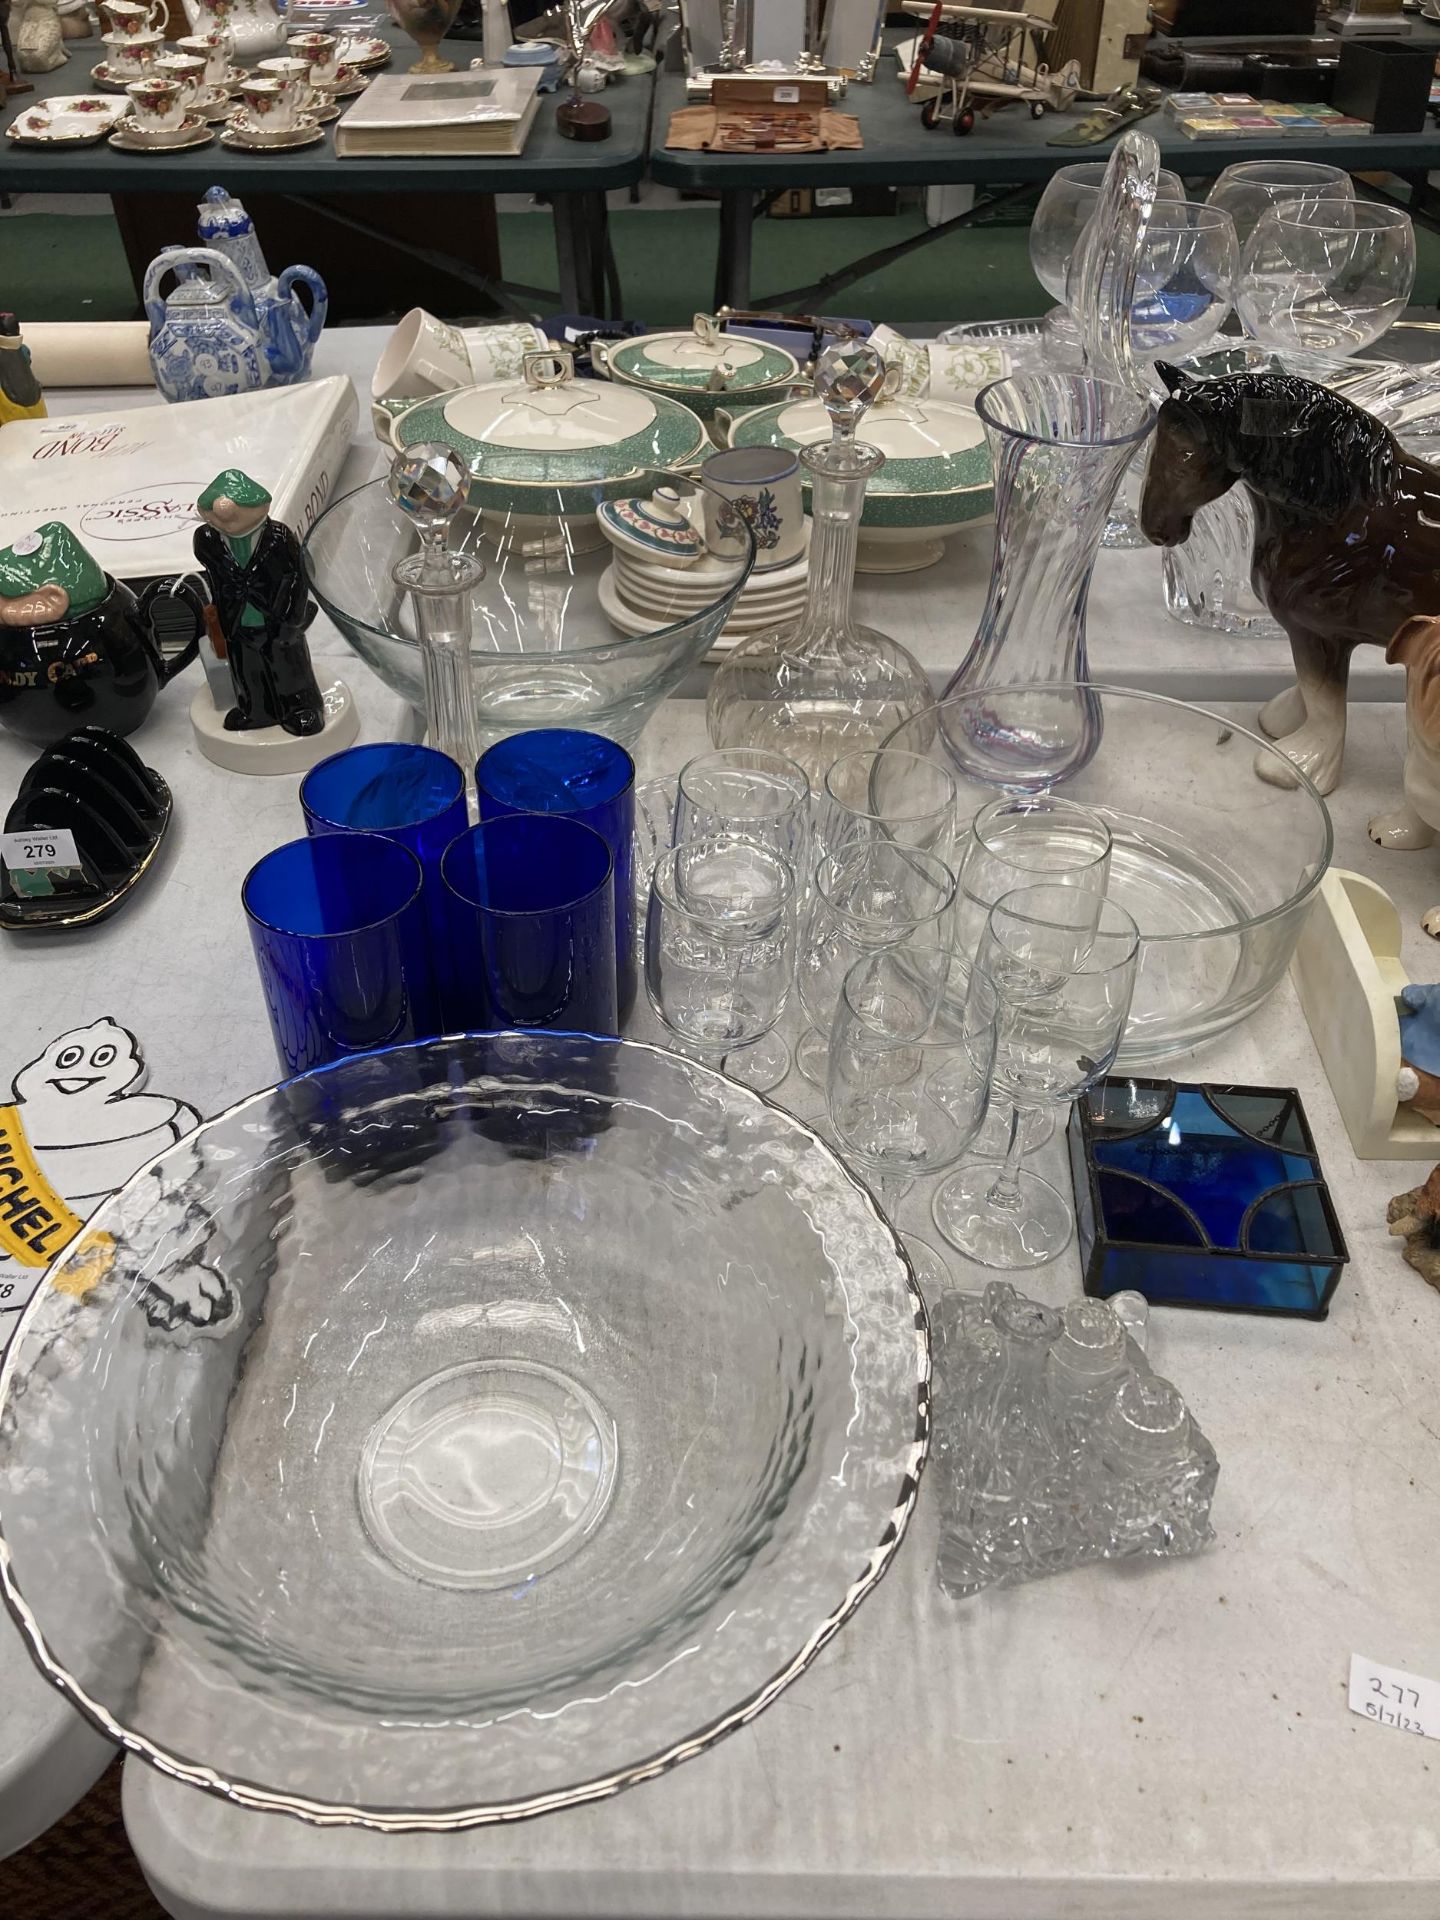 A LARGE QUANTITY OF GLASSWARE TO INCLUDE LARGE BOWLS, DECANTERS, VASES, WINE GLASSES, ETC